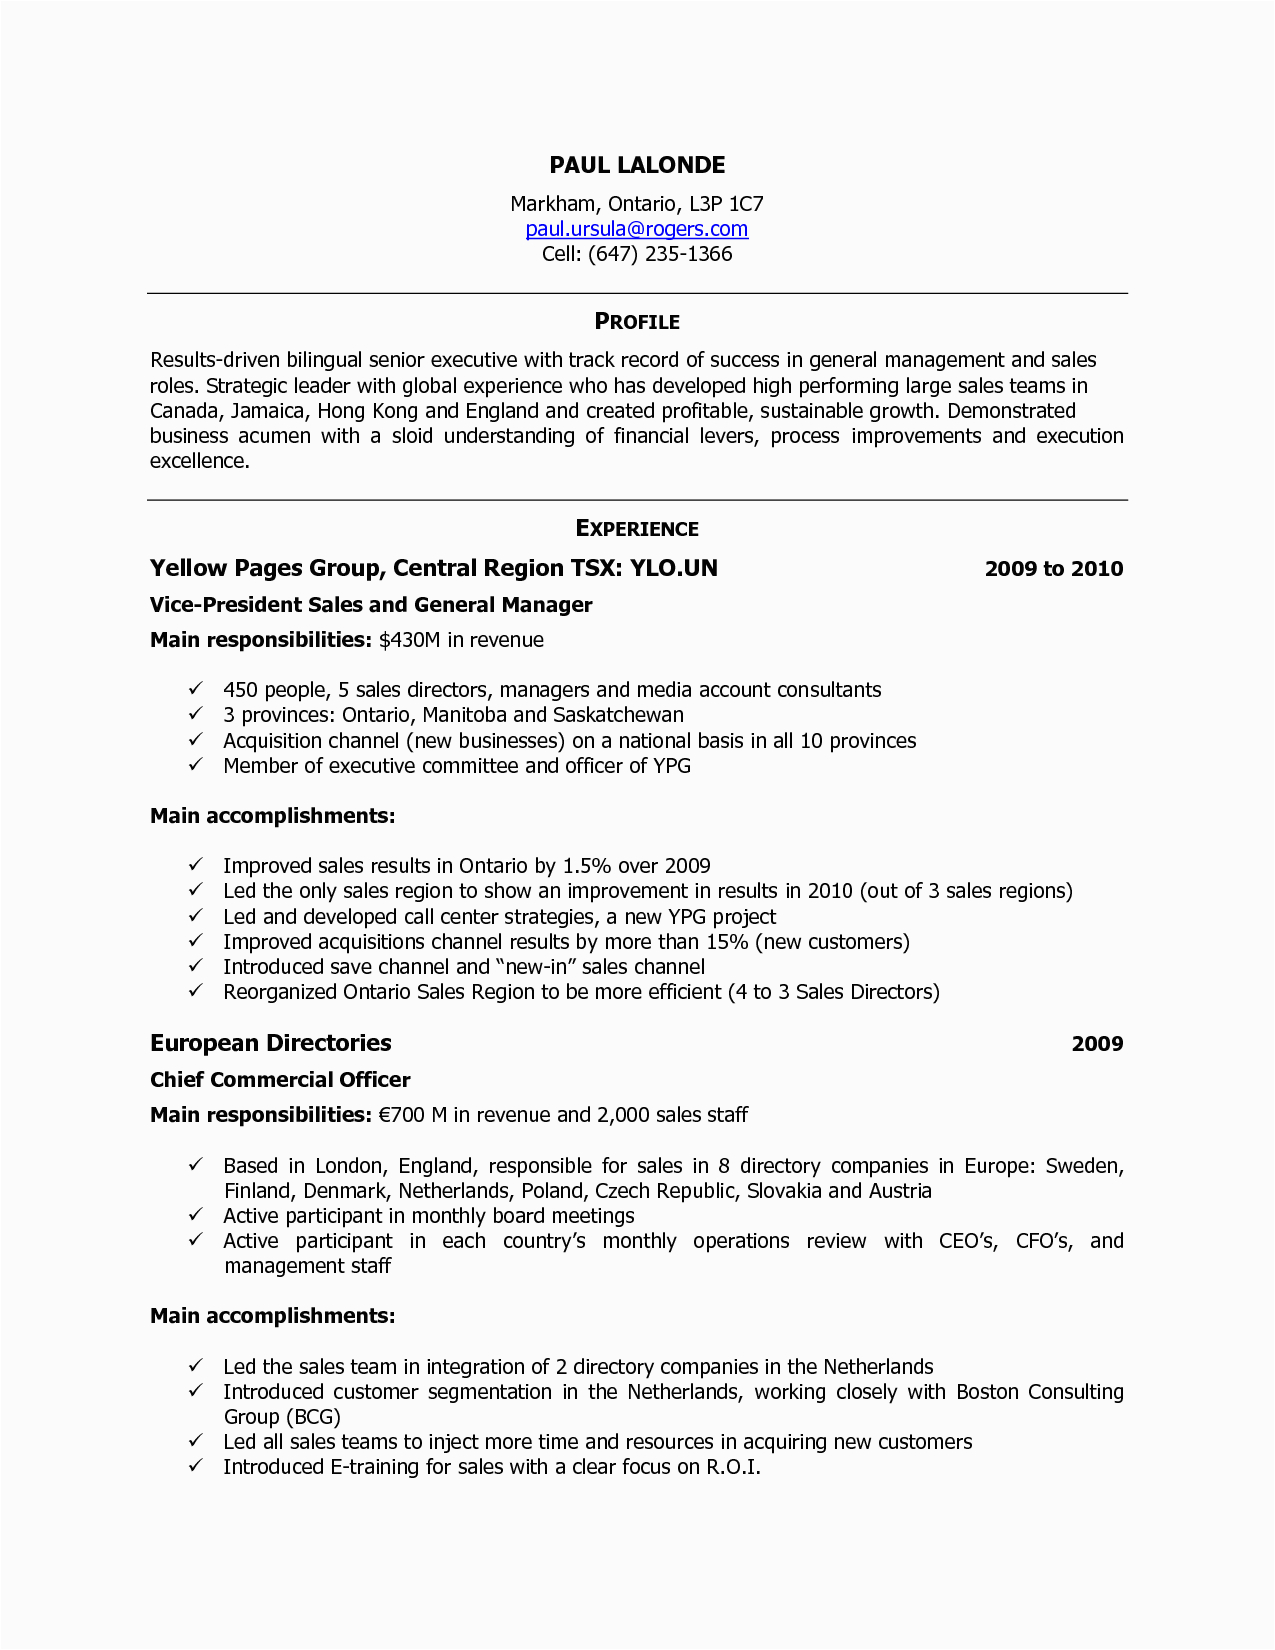 Sample Resumes for Jobs In Canada format Cv In Canada How to Write A Good Resume